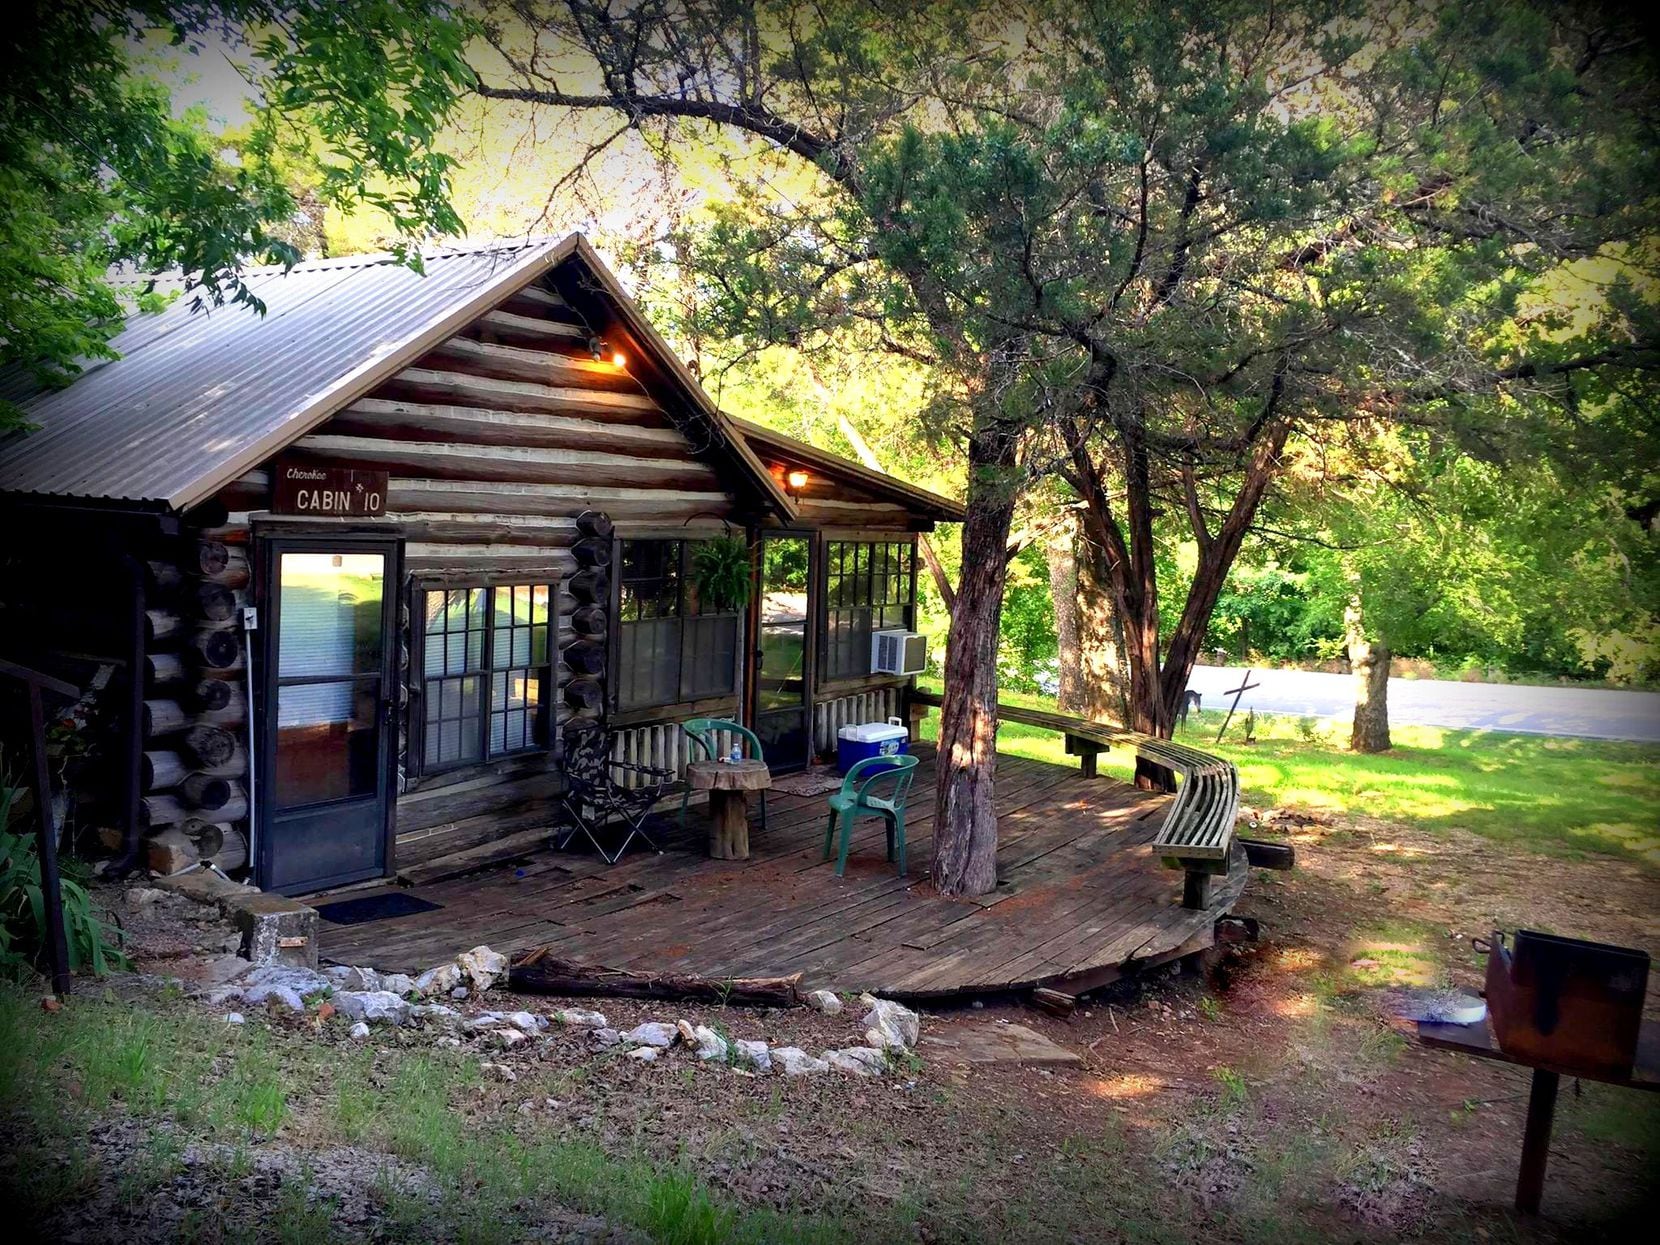 A stay at one of Cedarvale Mountainside Cabins’ 19 units offers an opportunity to explore the Oklahoma wilderness.